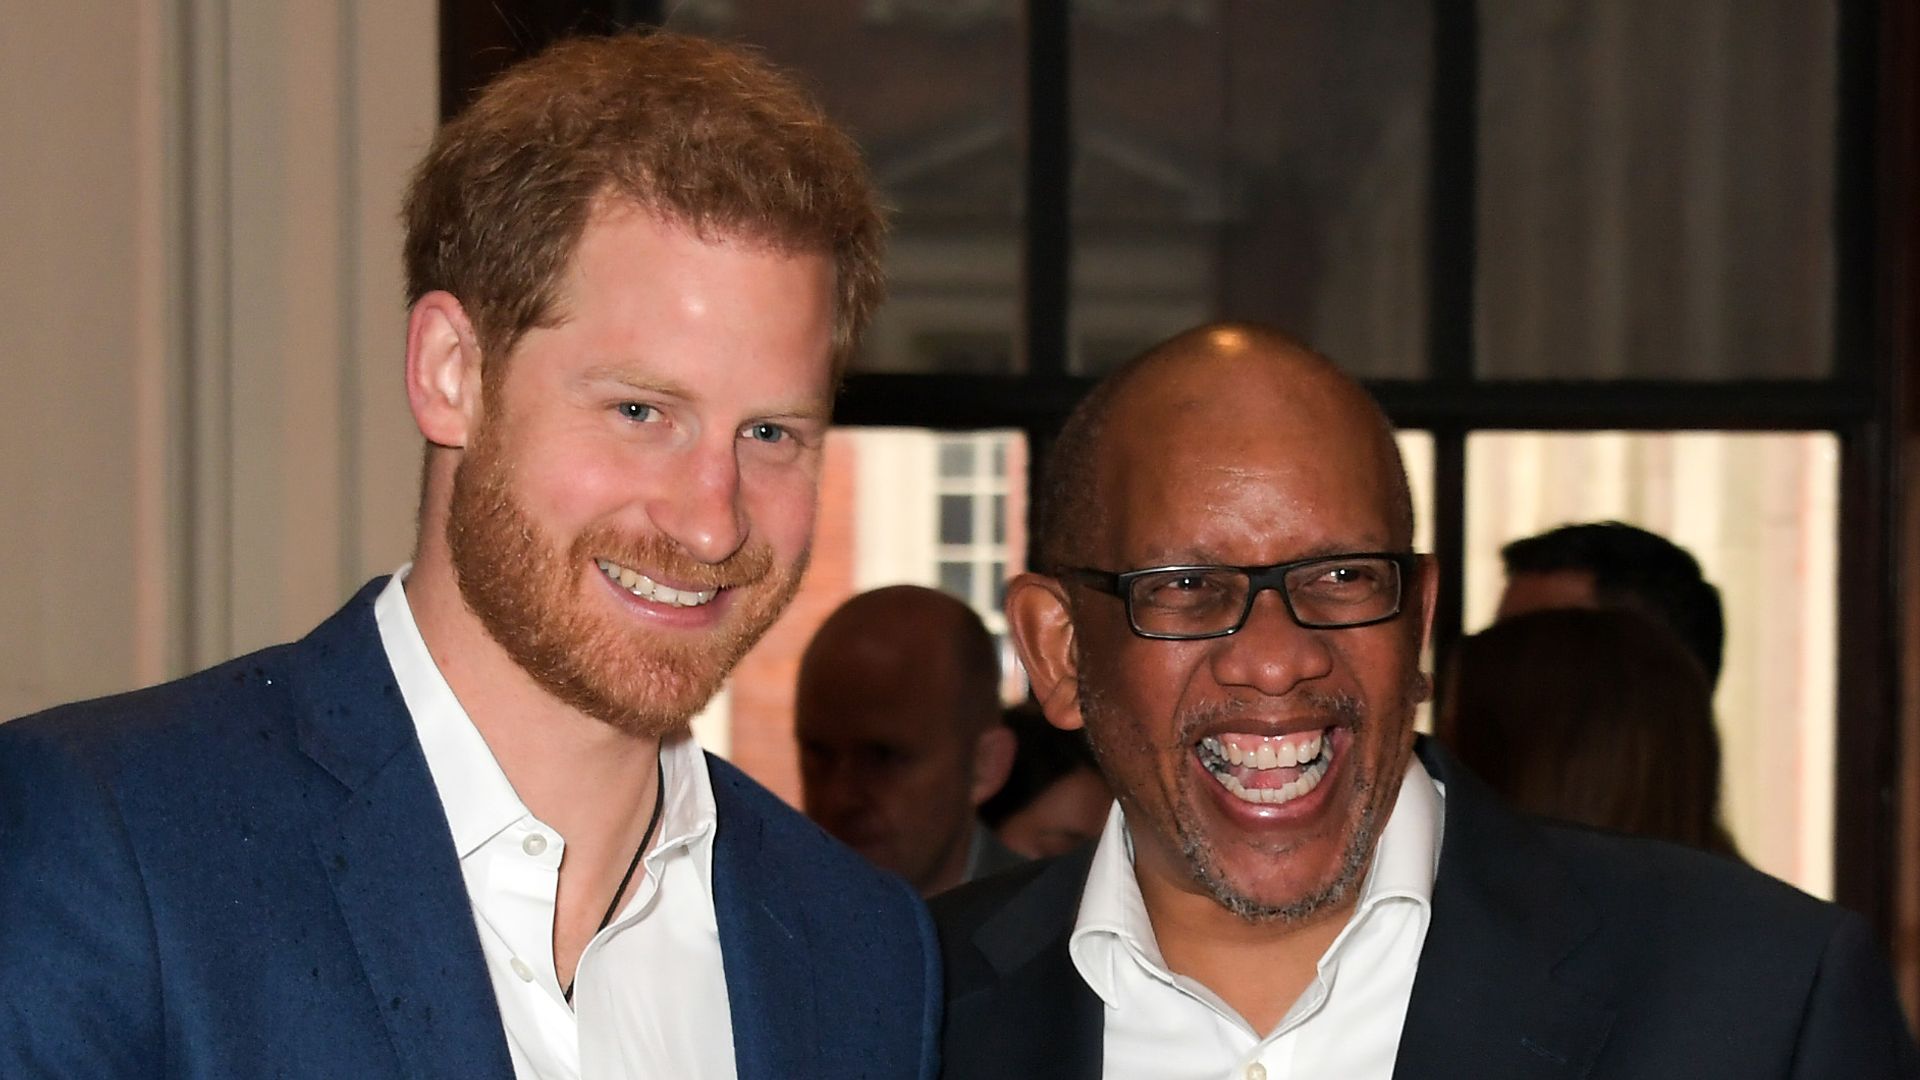 Prince Harry smiling with Prince Seeiso of Lesotho